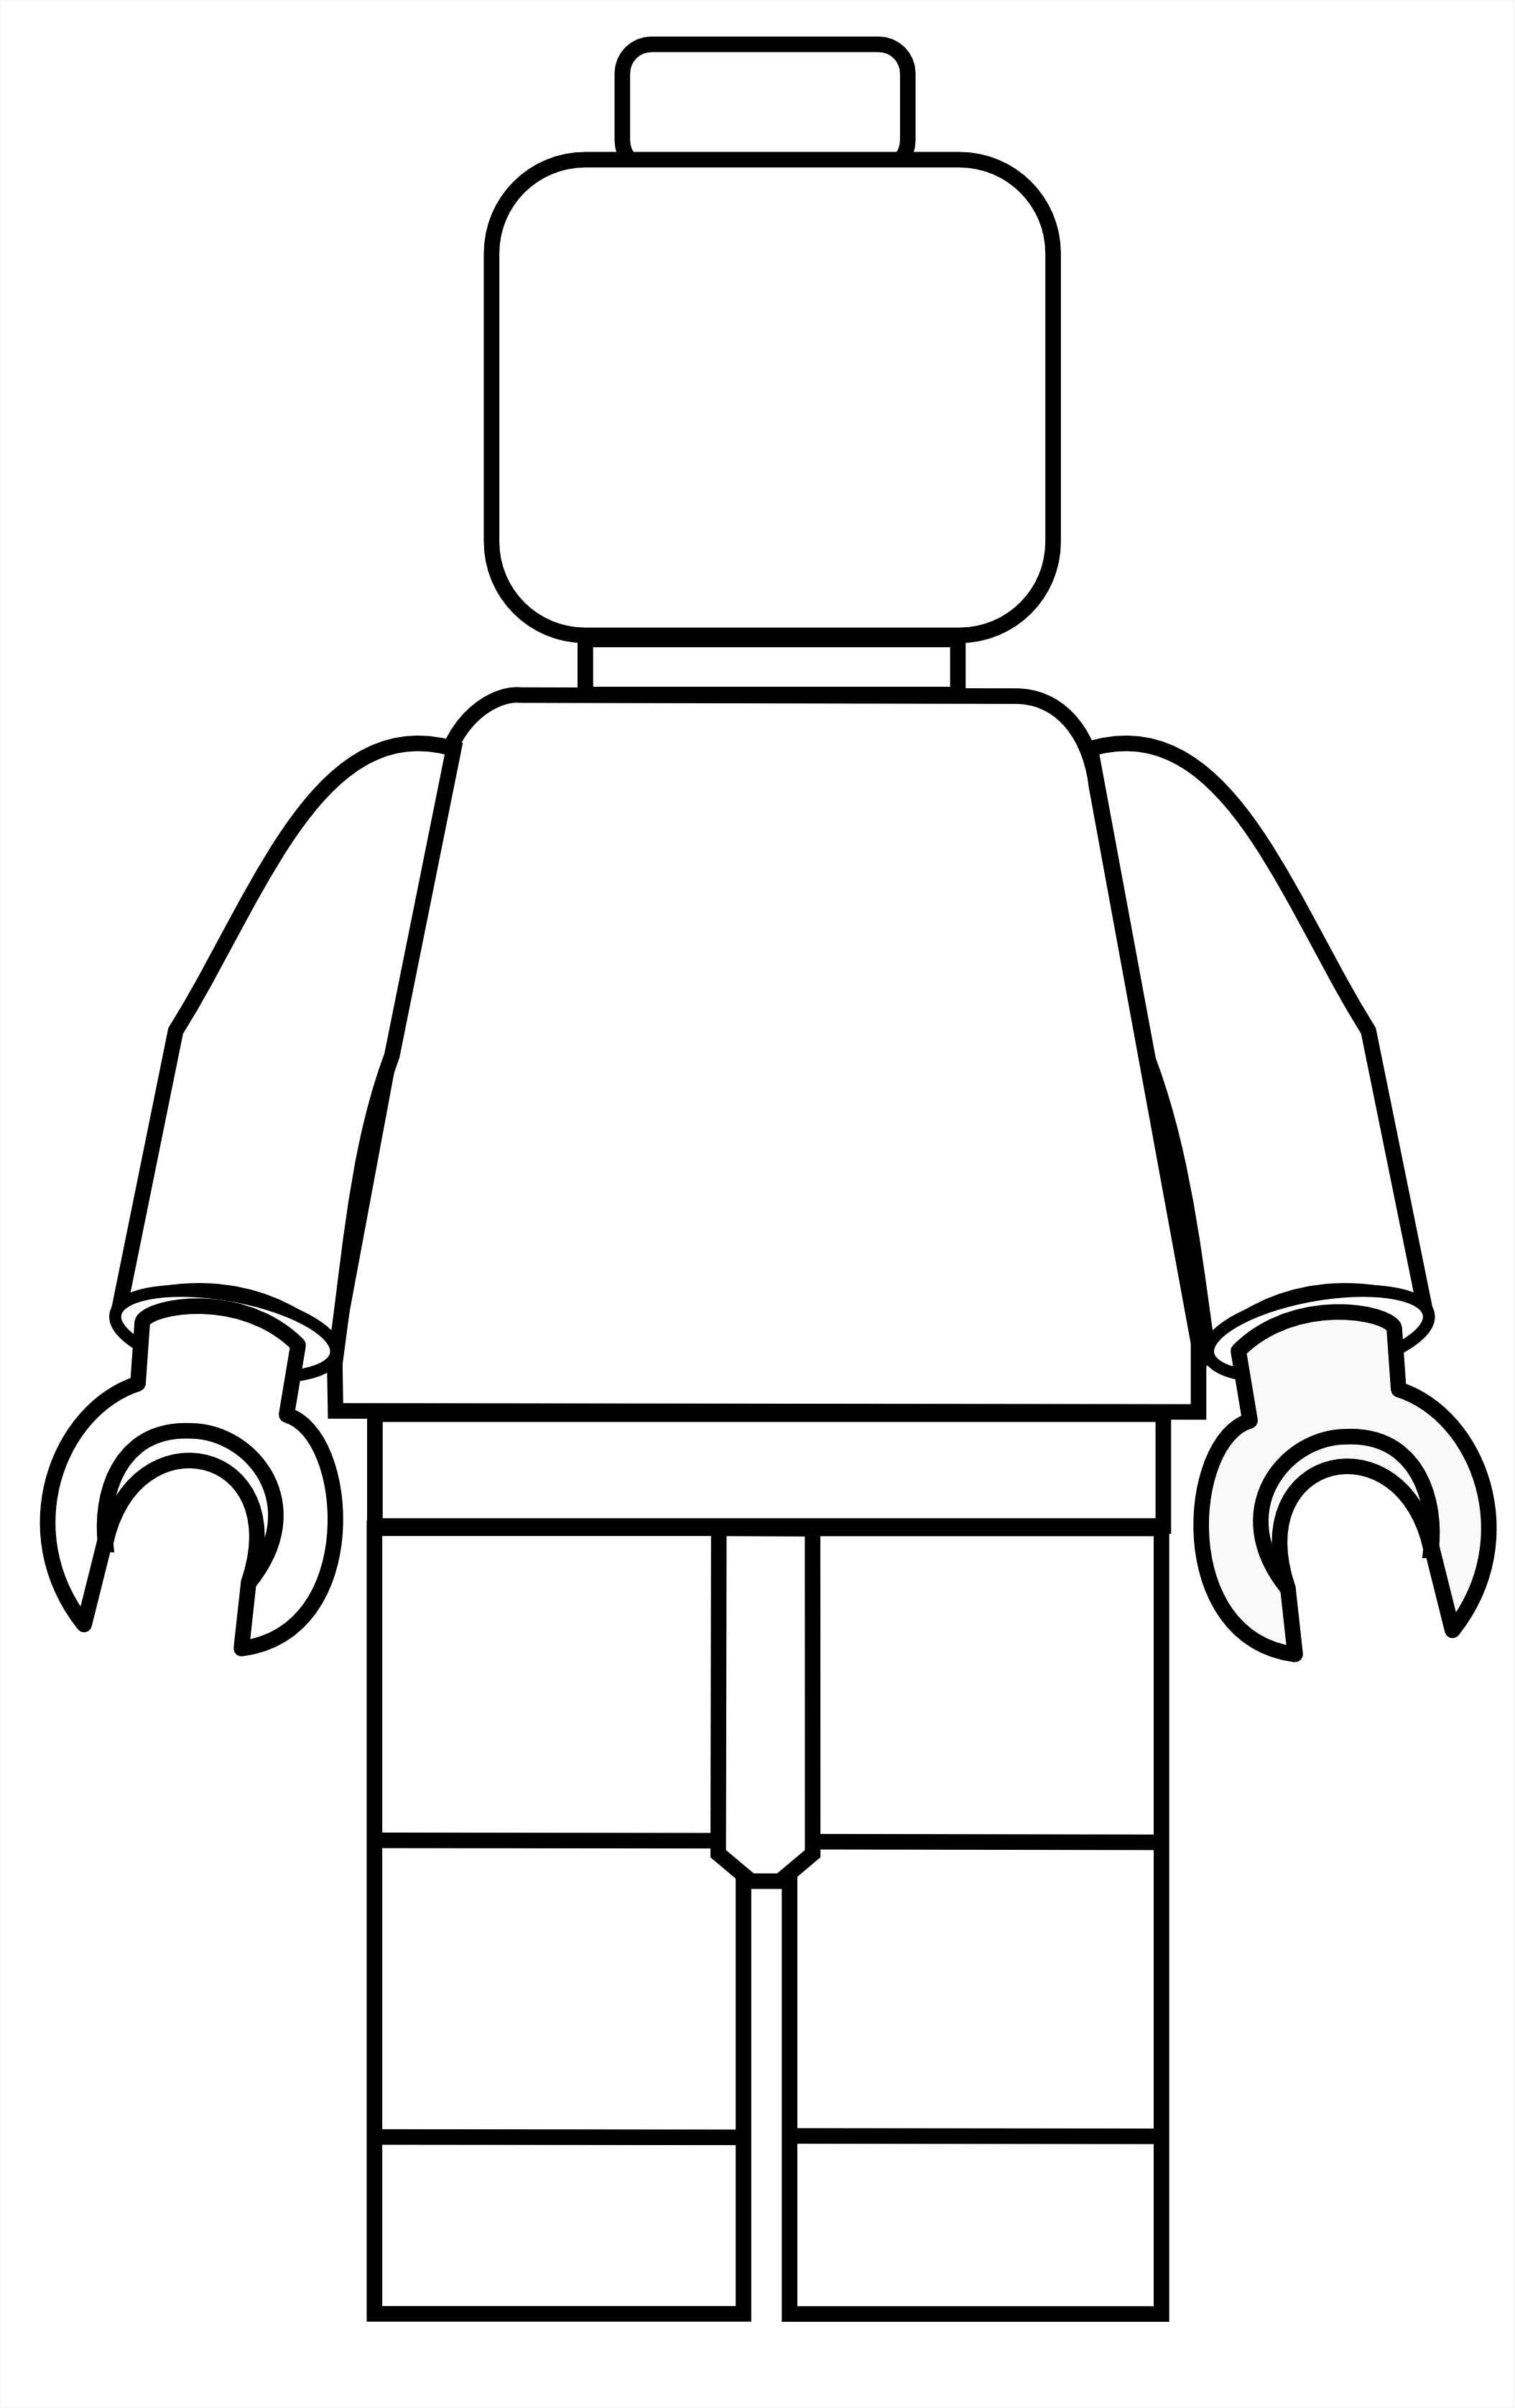 Outline Lego Head - ClipArt Best